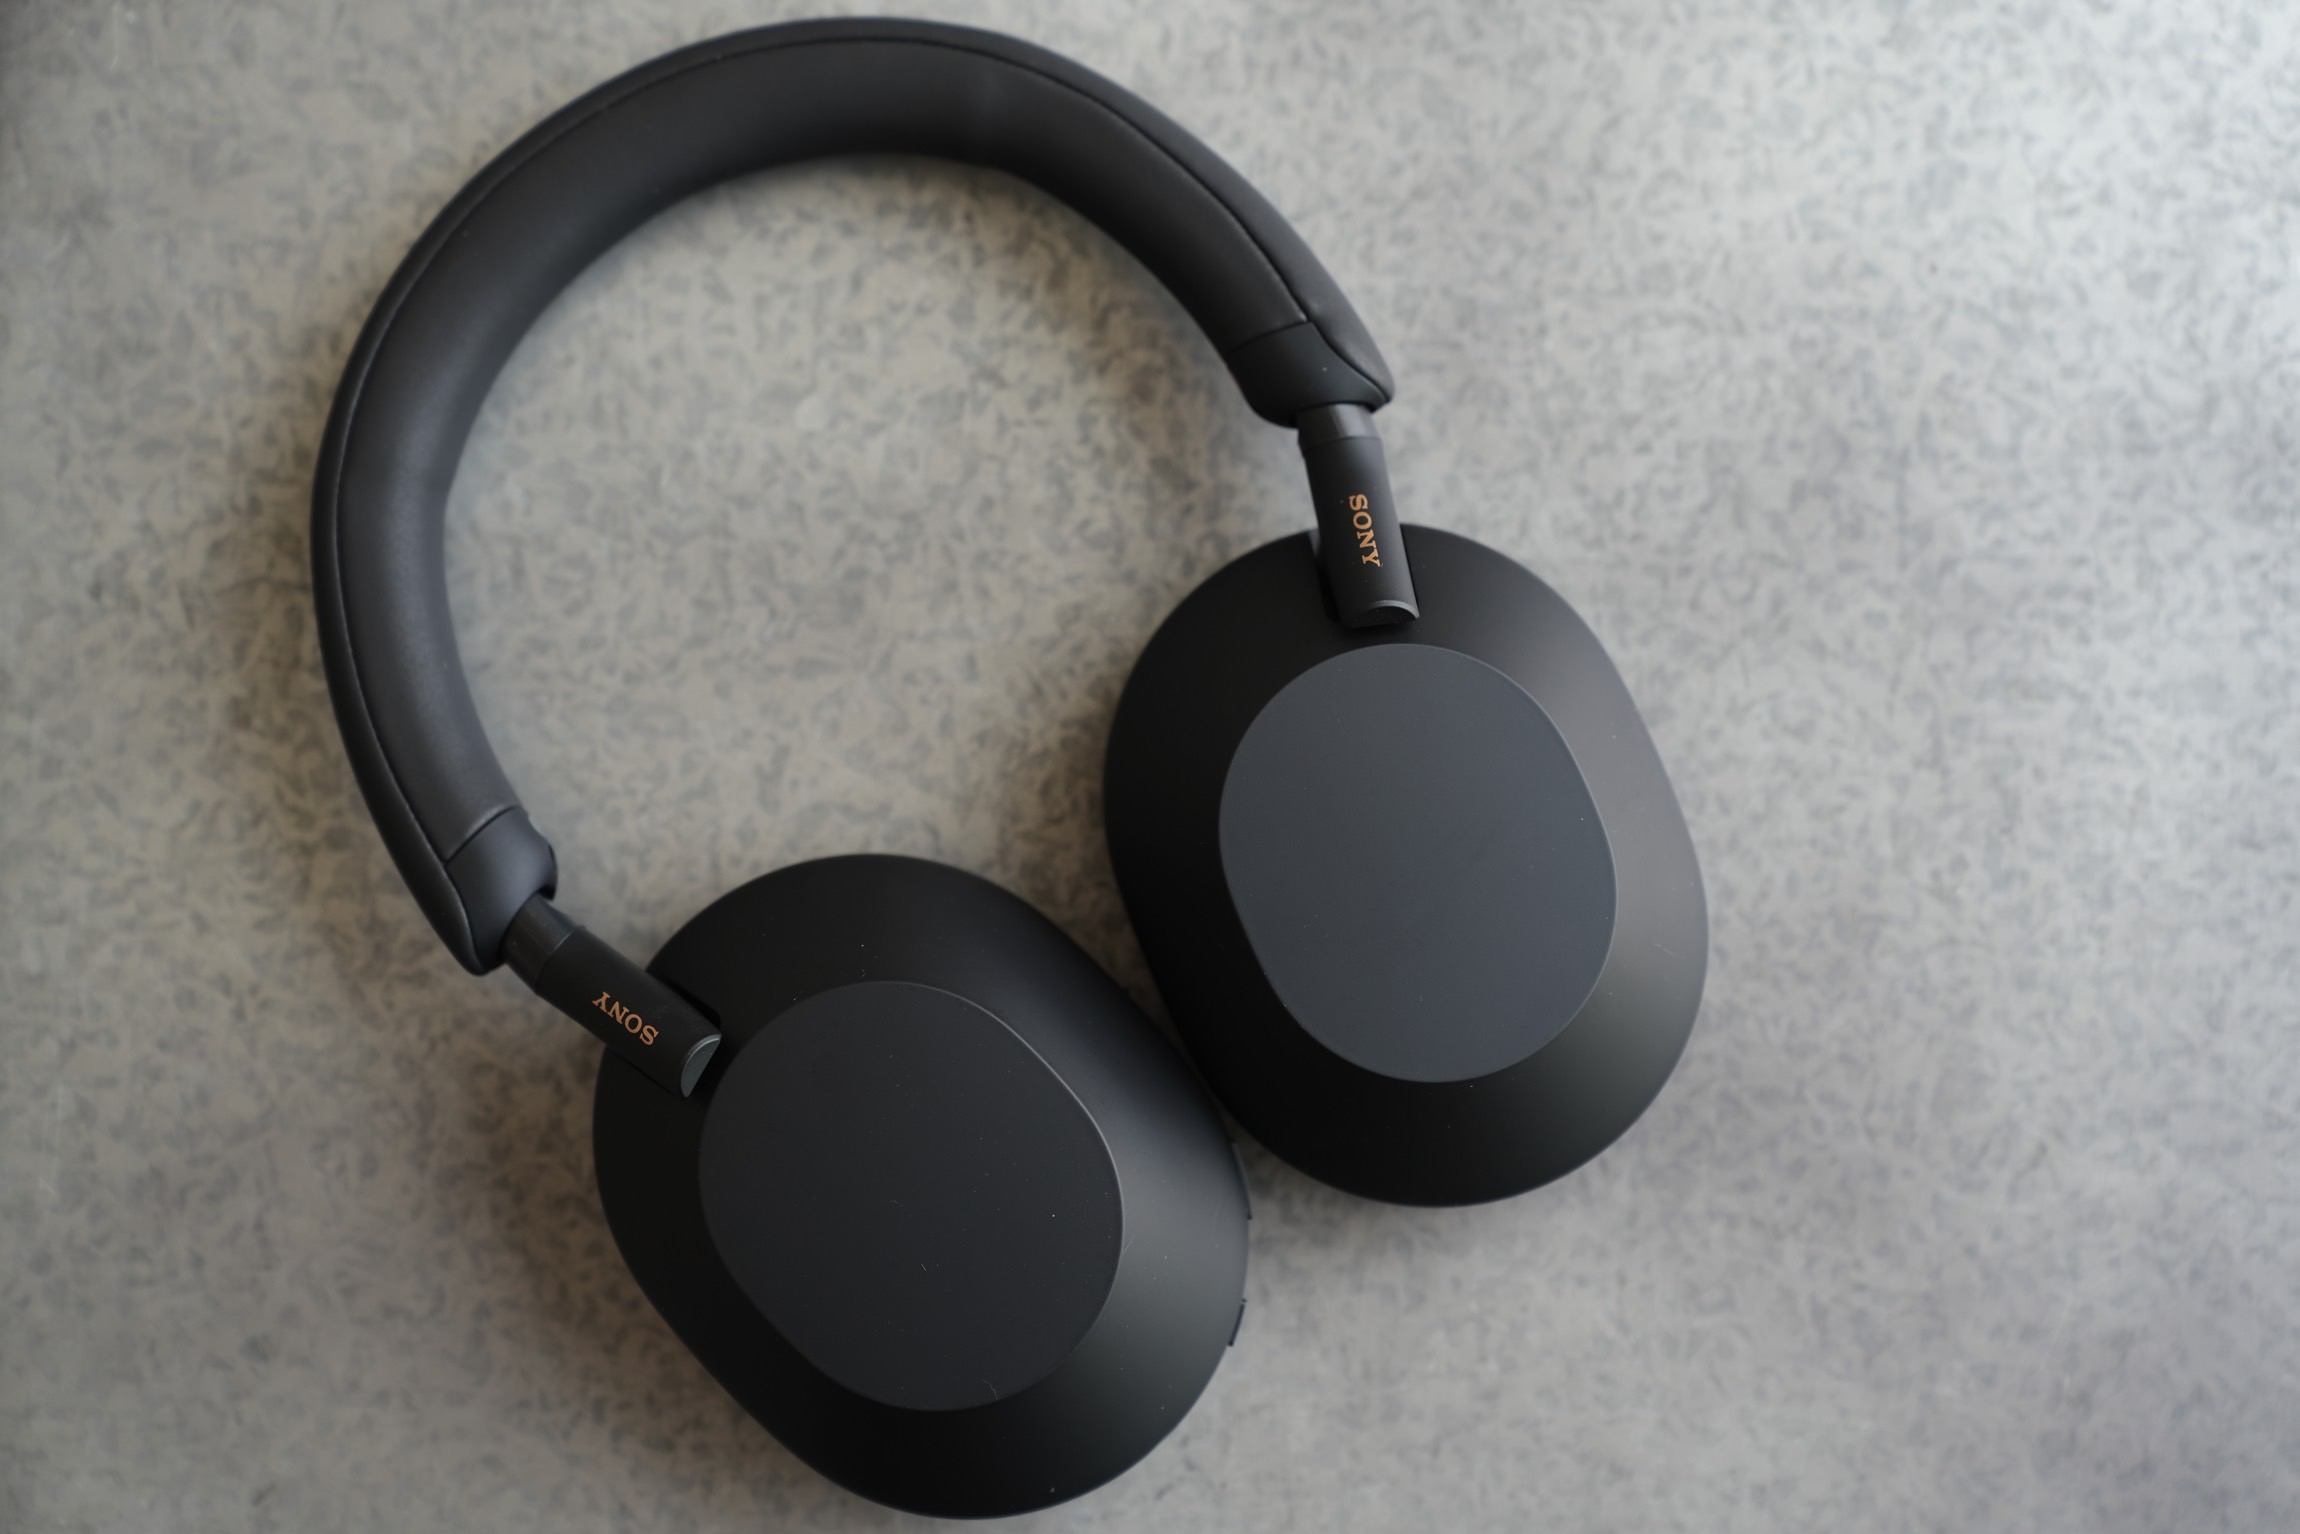 The Best On-Ear Wireless Headphones From $100 to $400